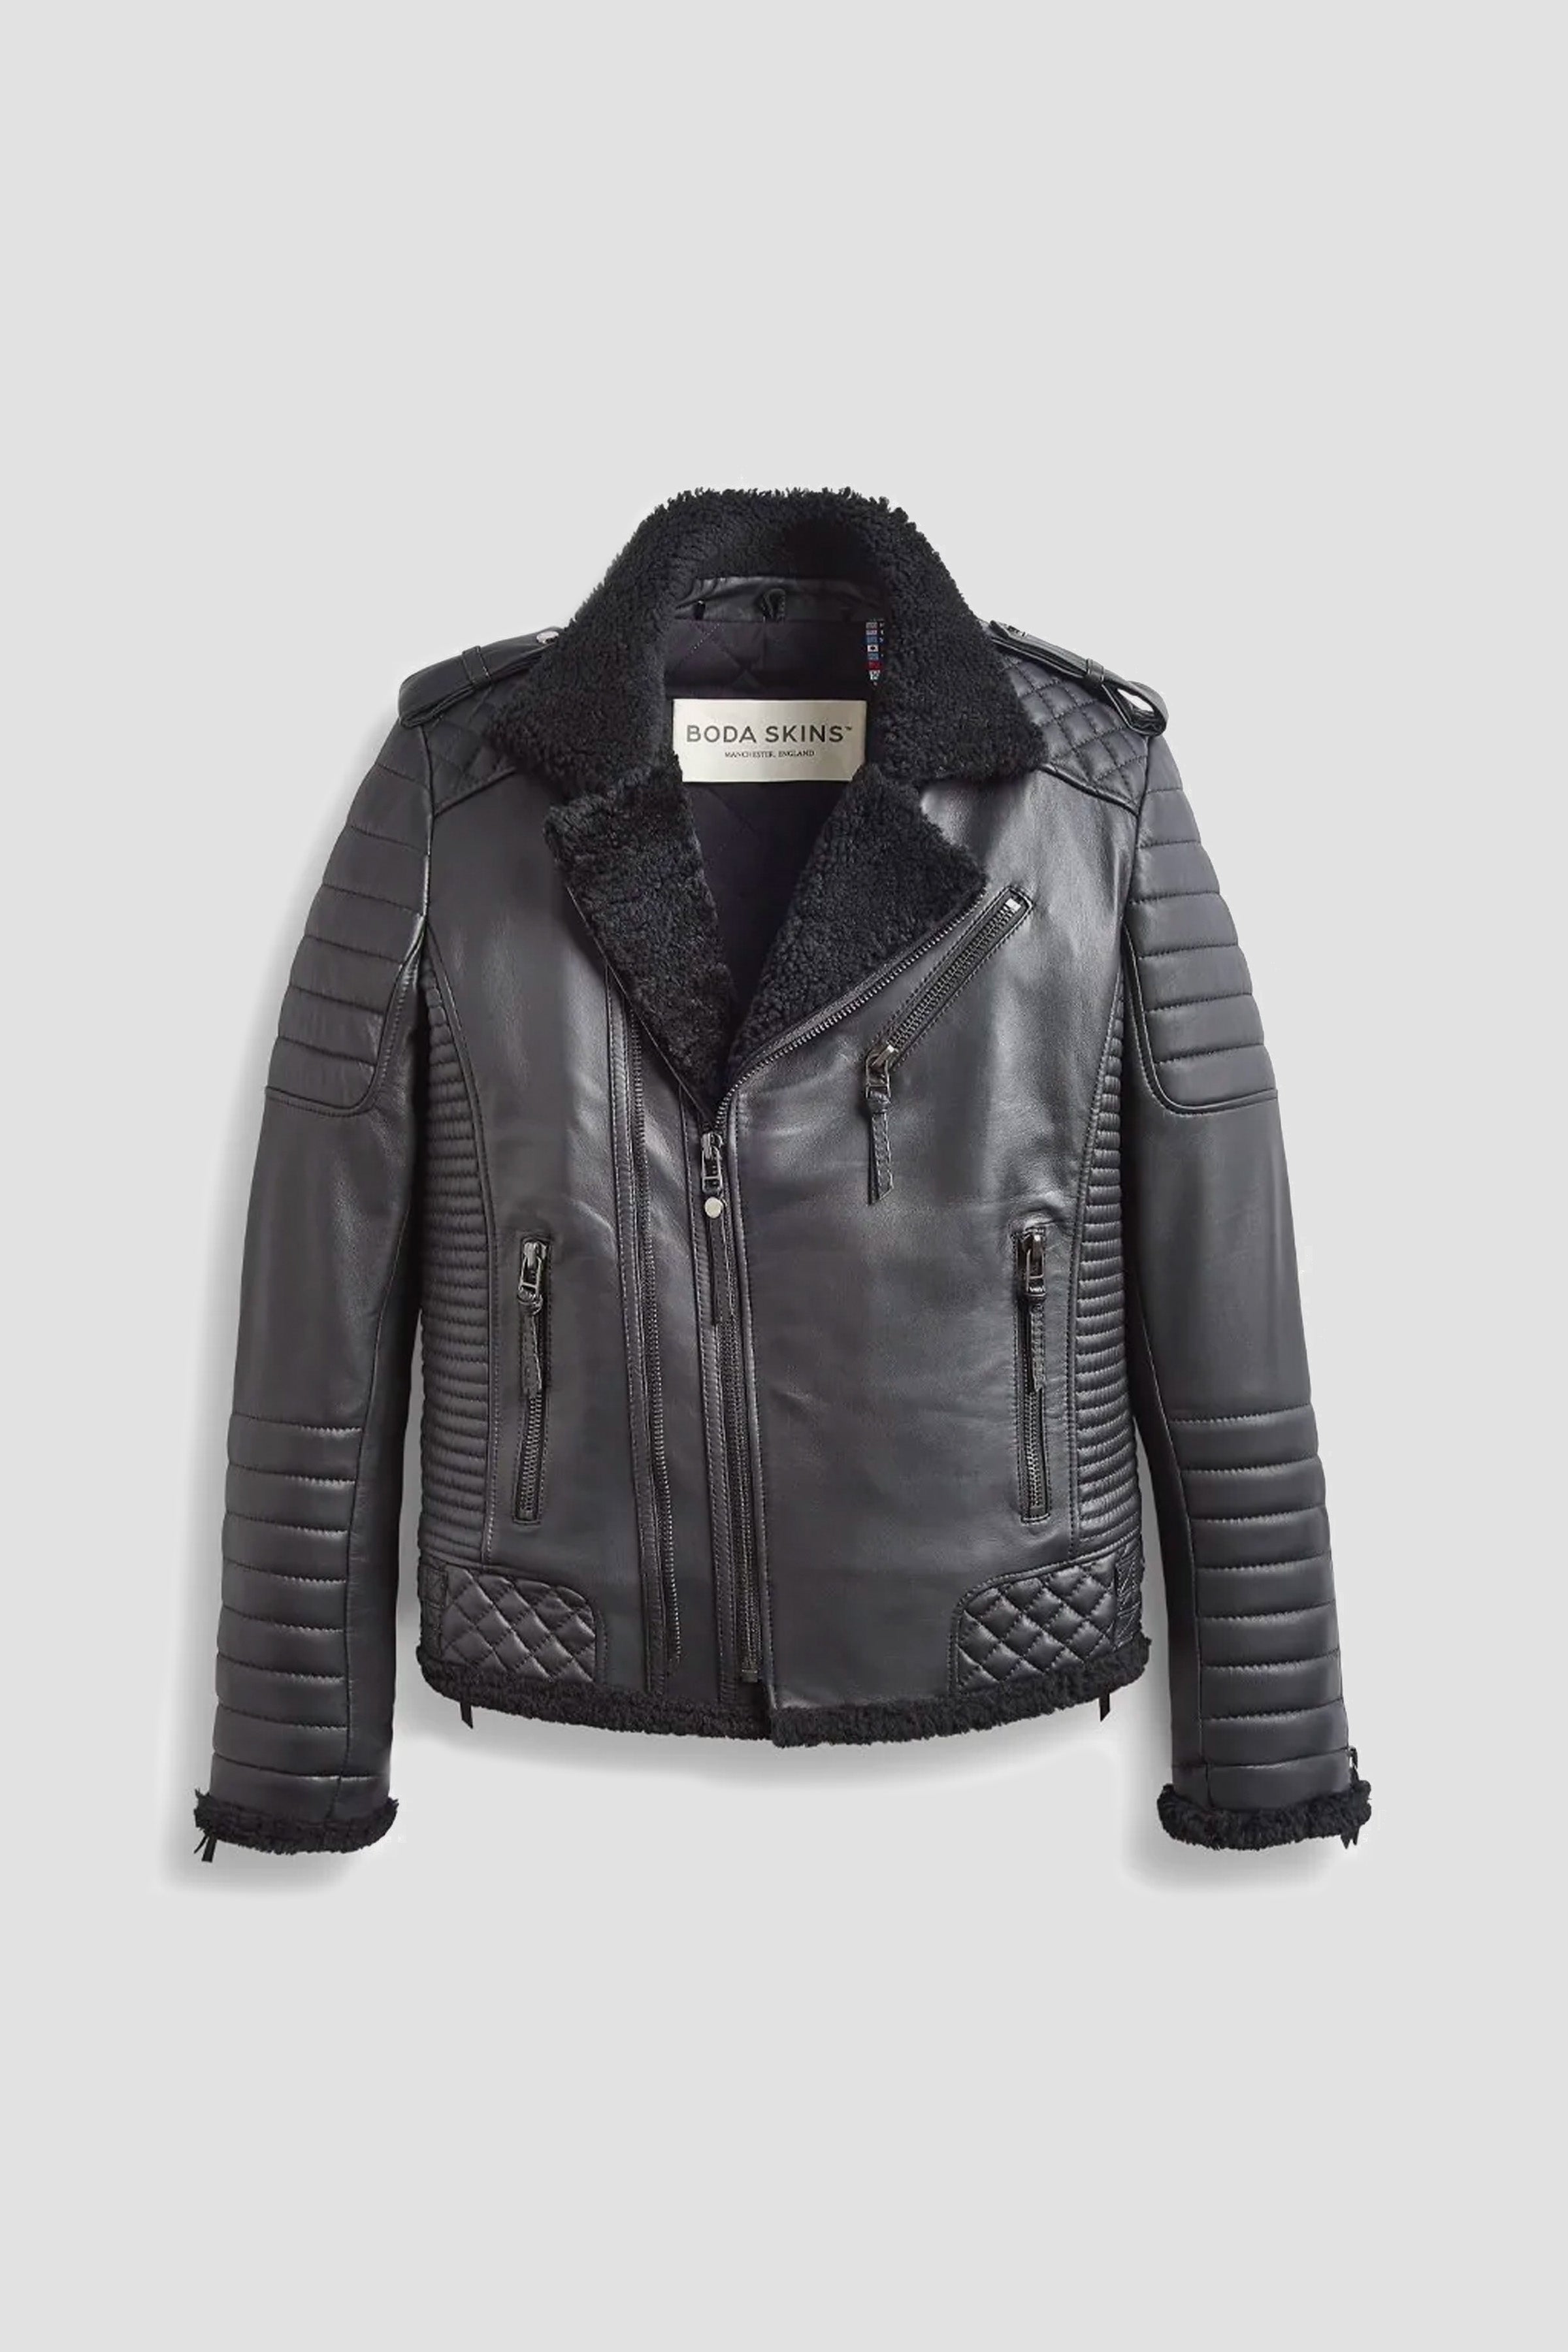 Men's Kay Michaels Leather Jacket with Shearling lining in Black | BODA ...